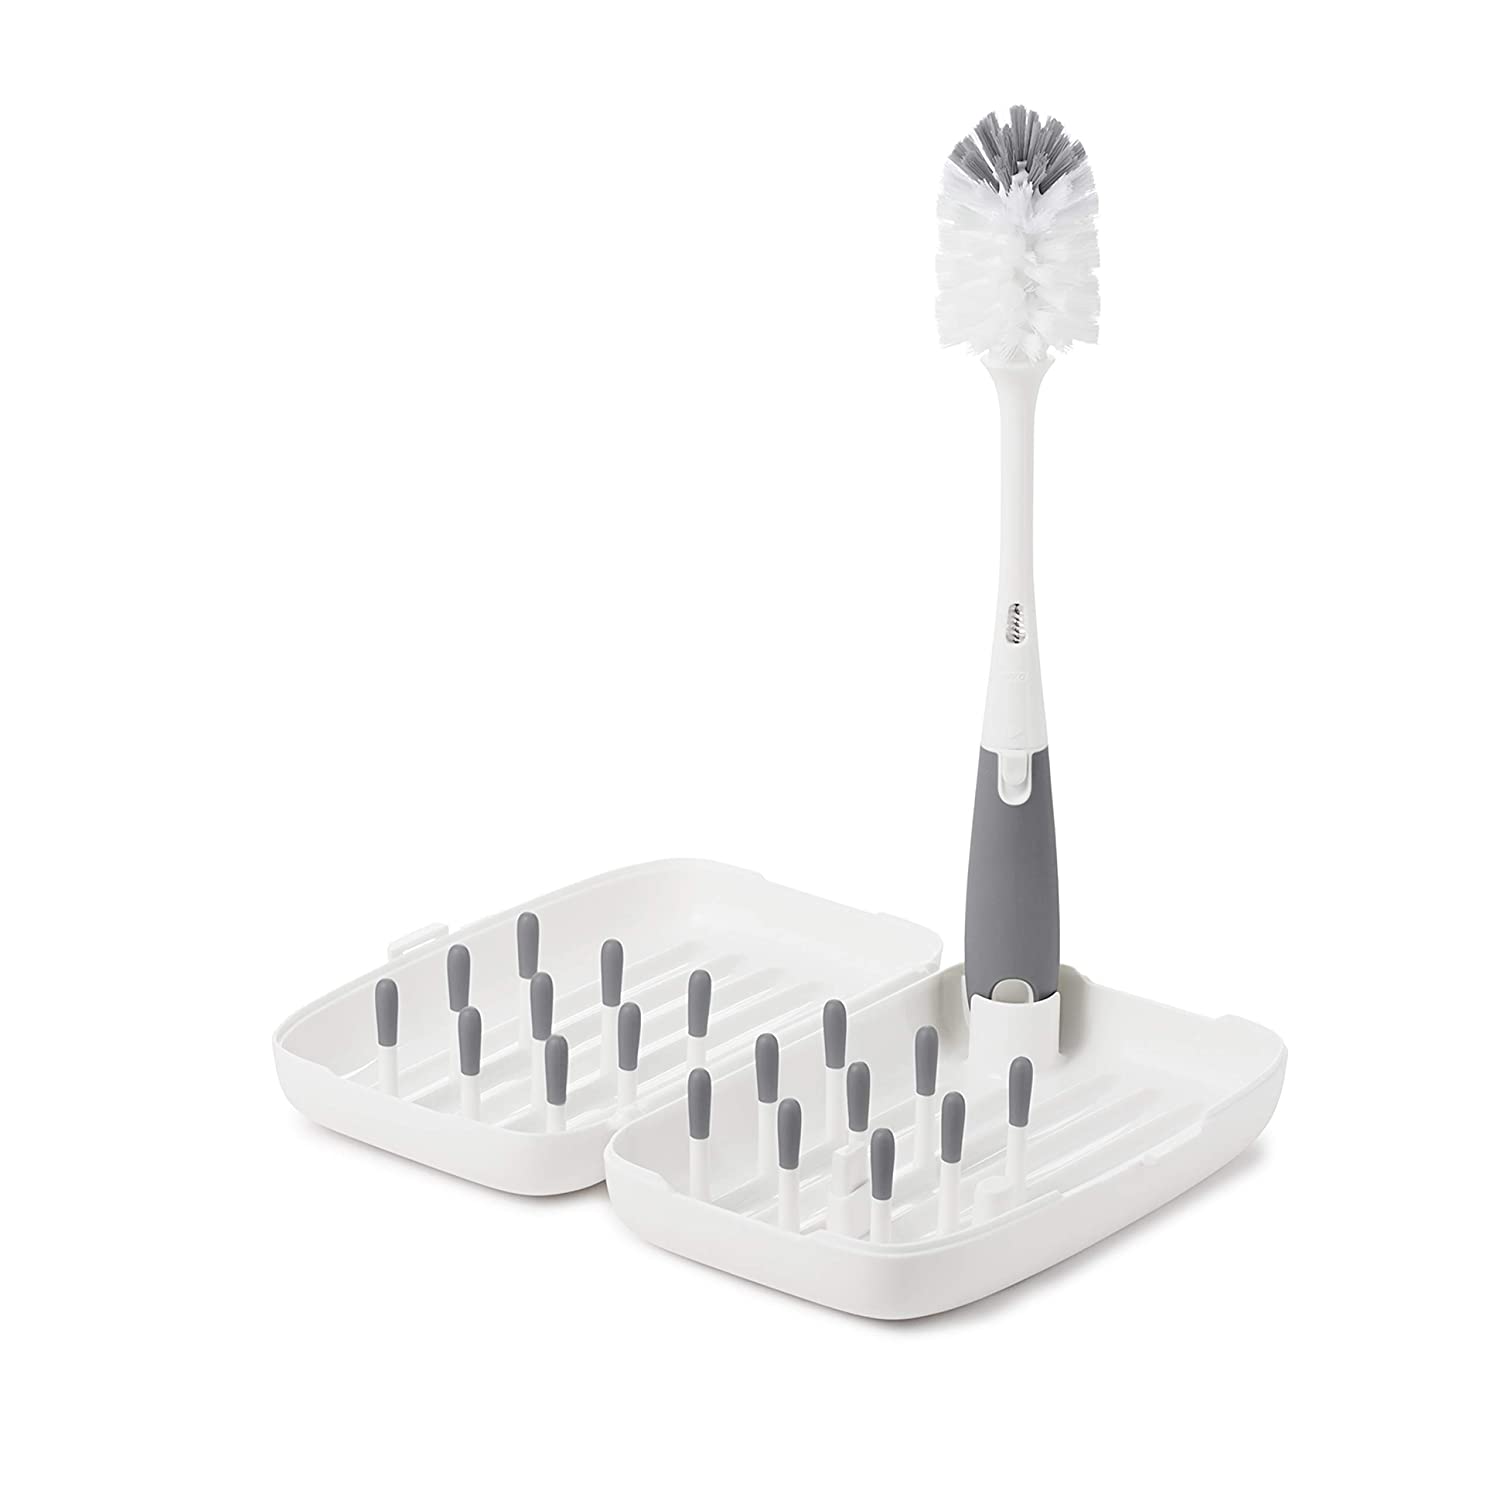 OXO TOT On-The-Go Drying Rack With Bottle Brush, -- ANB Baby